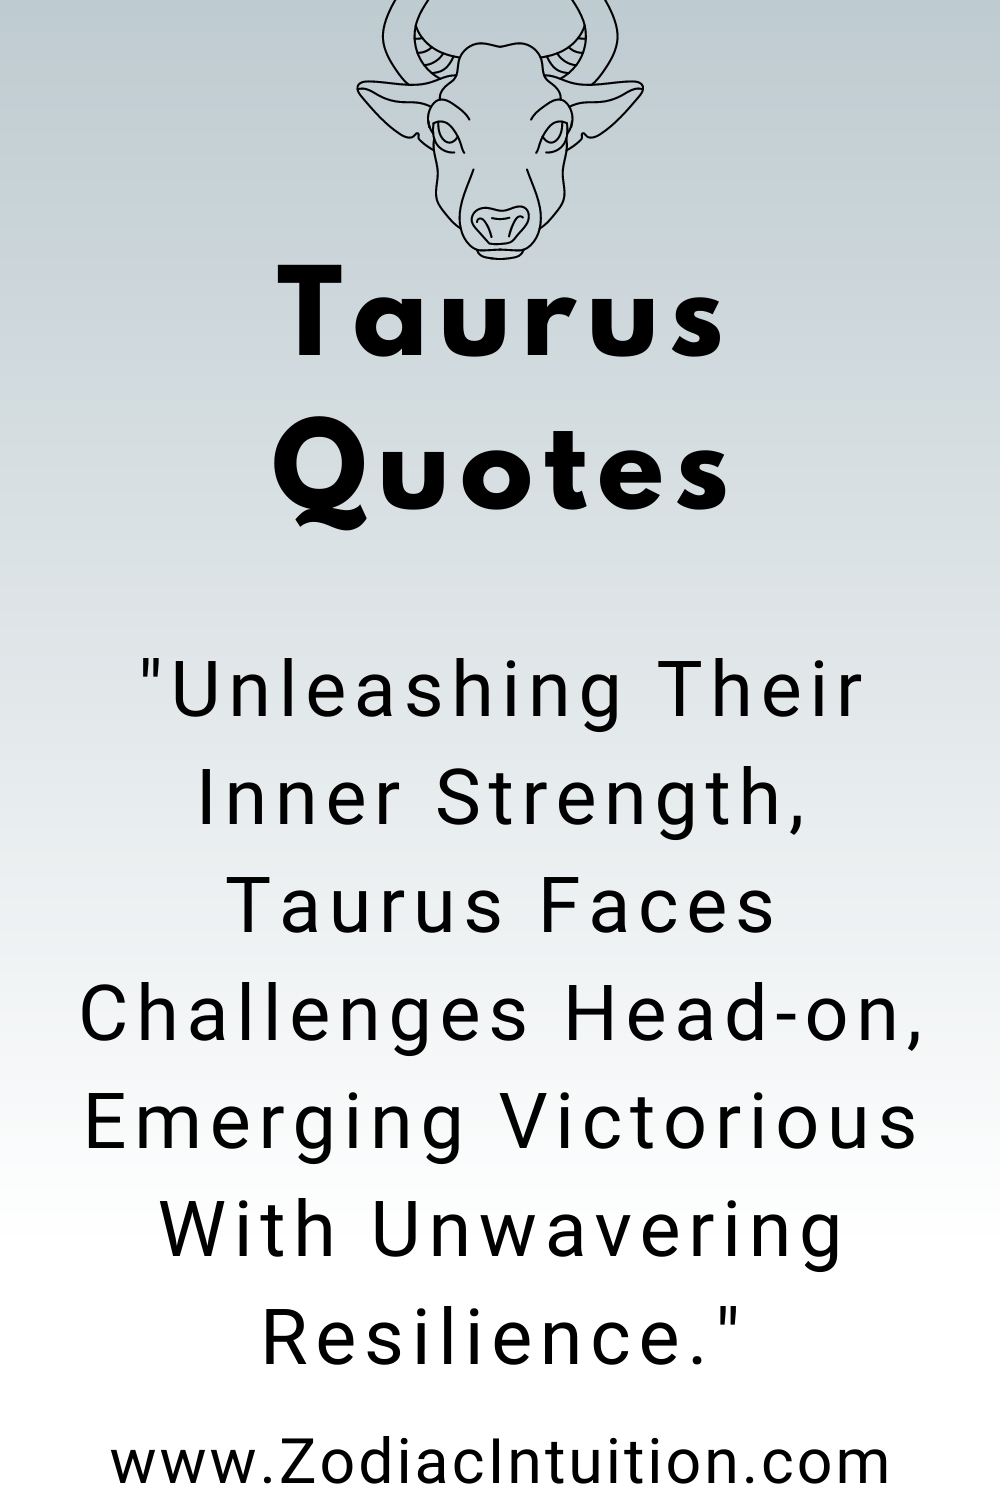 Top 5 Taurus Quotes And Inspiration